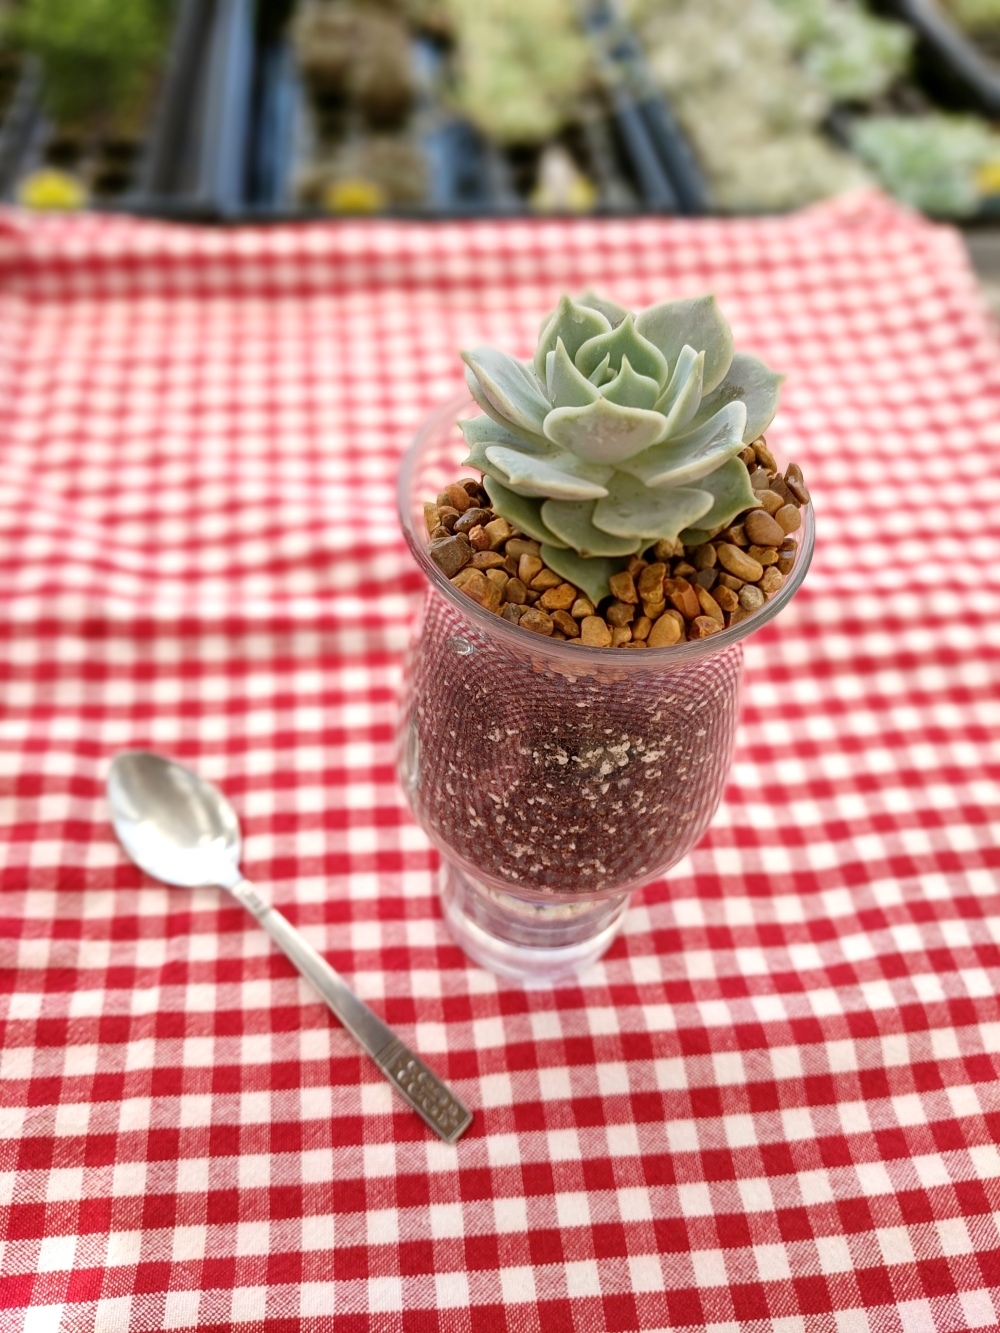 Succulent in a sundae glass with rocks, soil, and white gravel with a spoon next to it